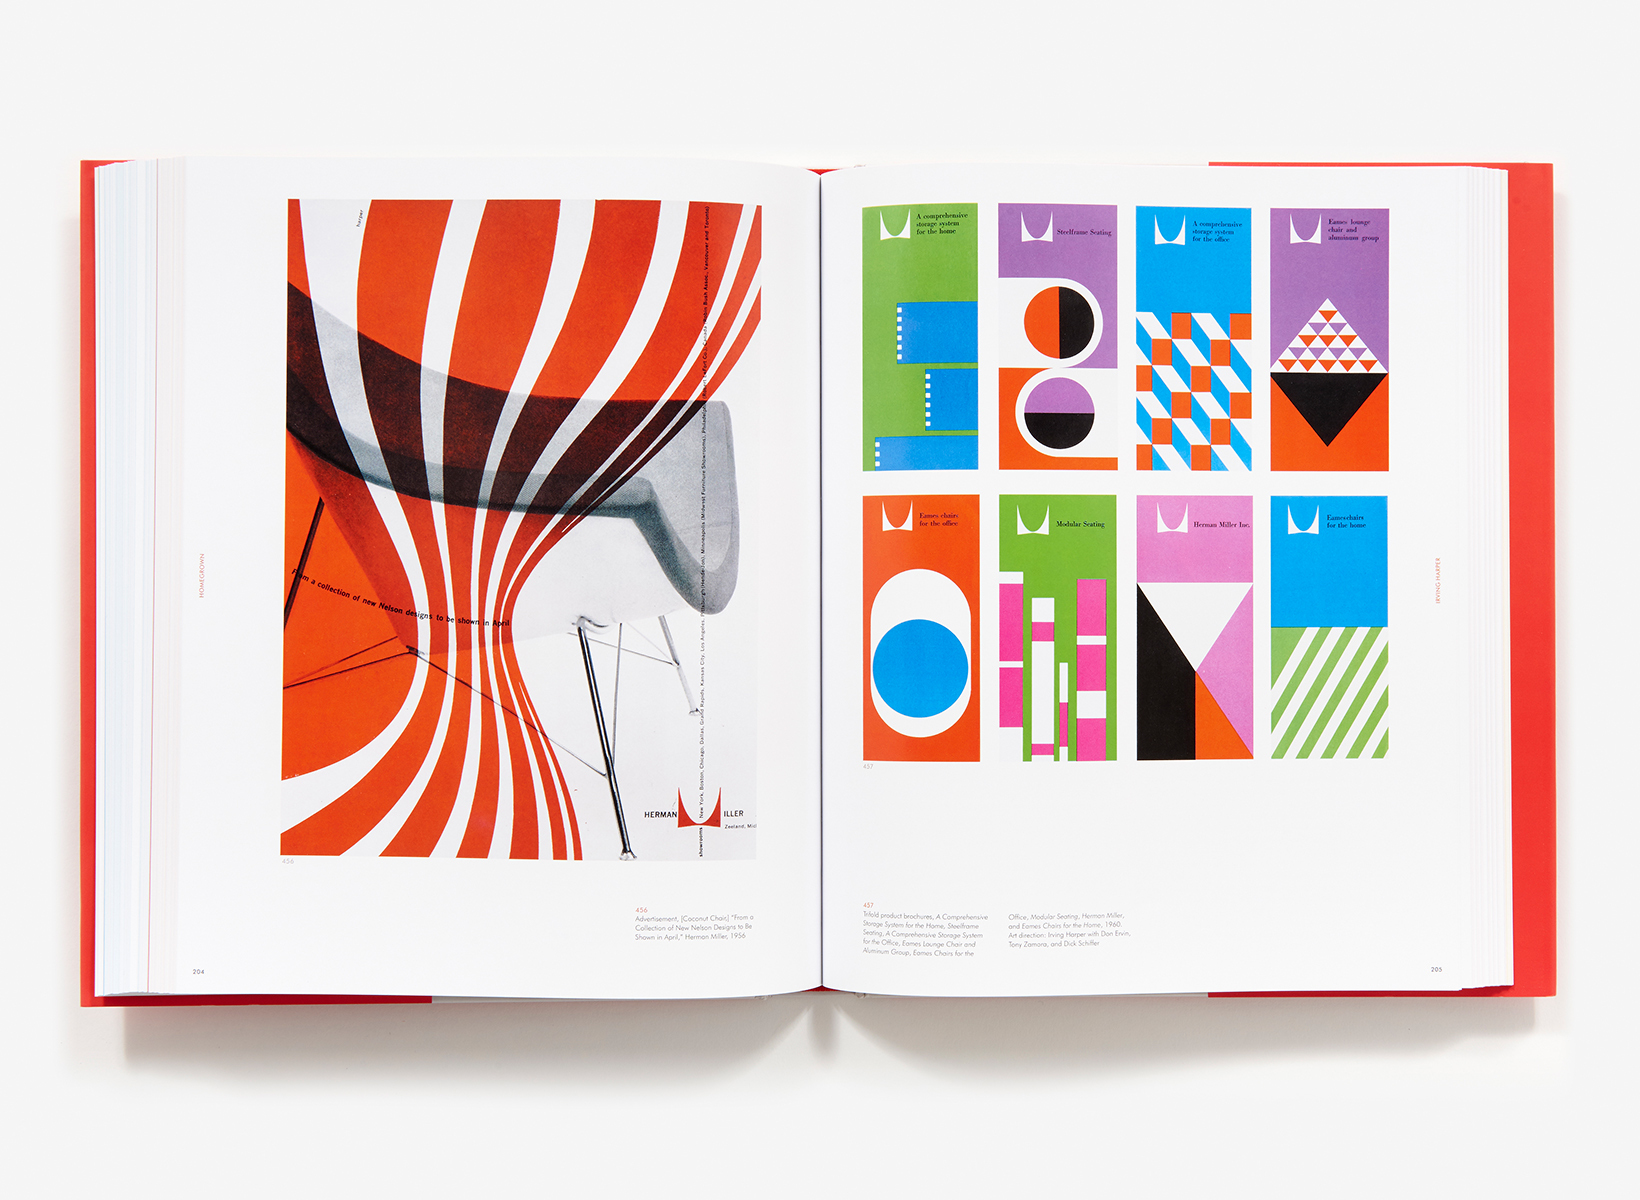 A Guide to Design Book Publishing for the Non-Rich and Non-Famous - 99U